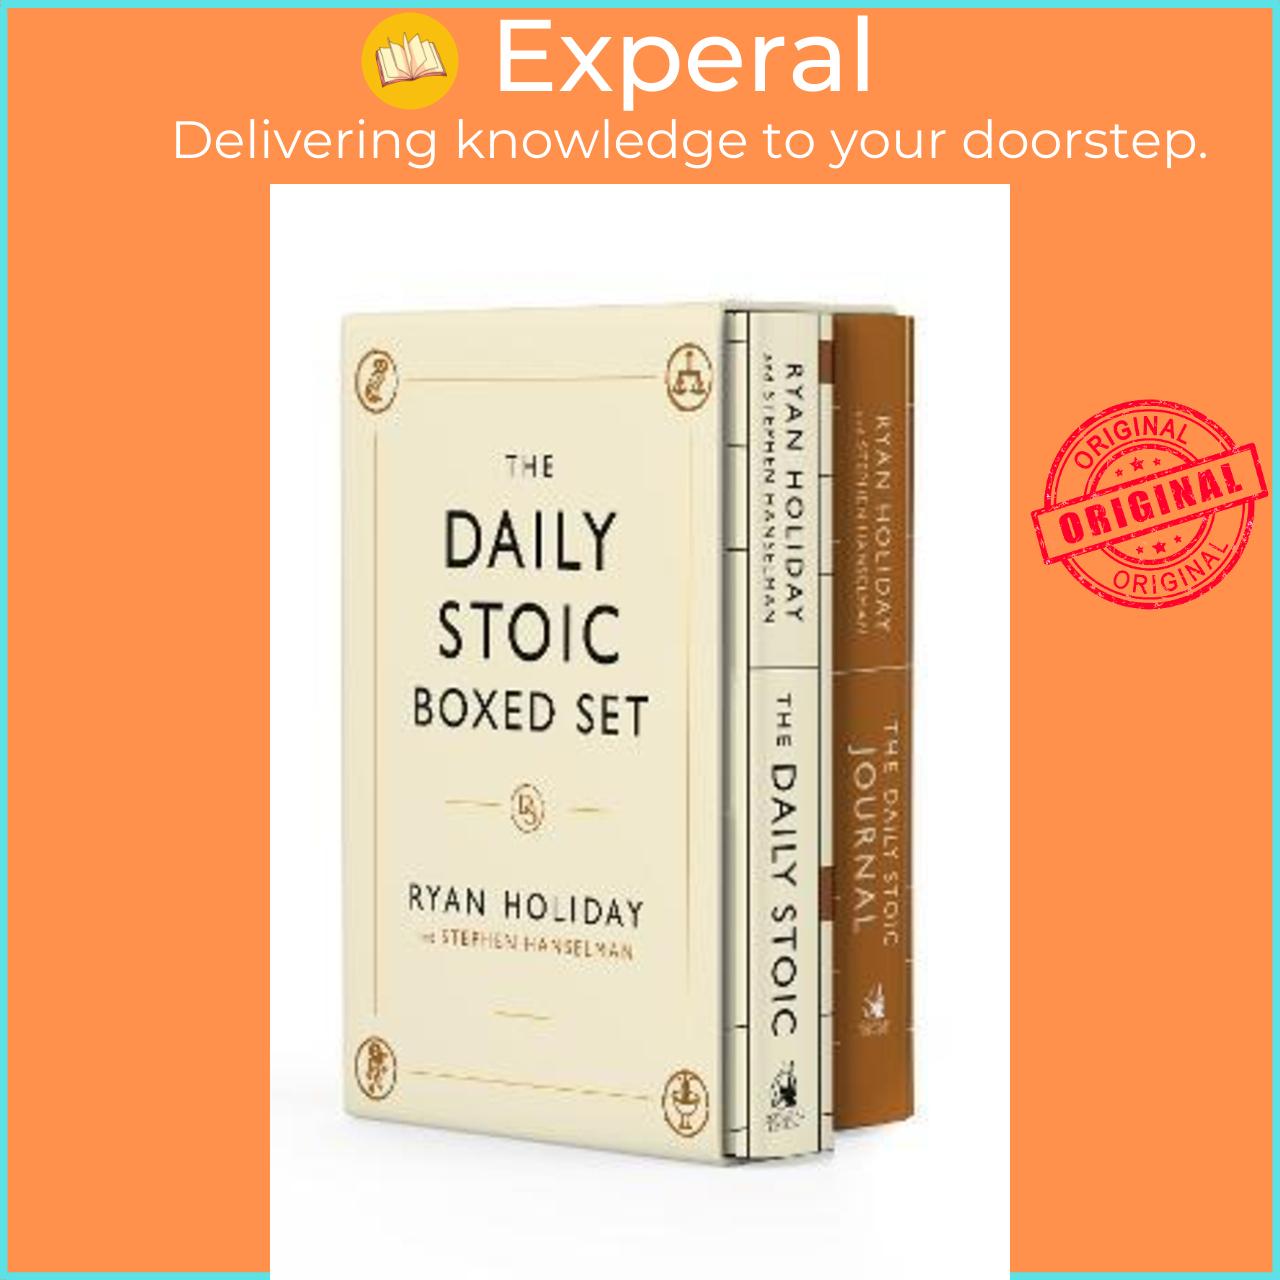 Sách - The Daily Stoic Boxed Set by Ryan Holiday (US edition, hardcover)